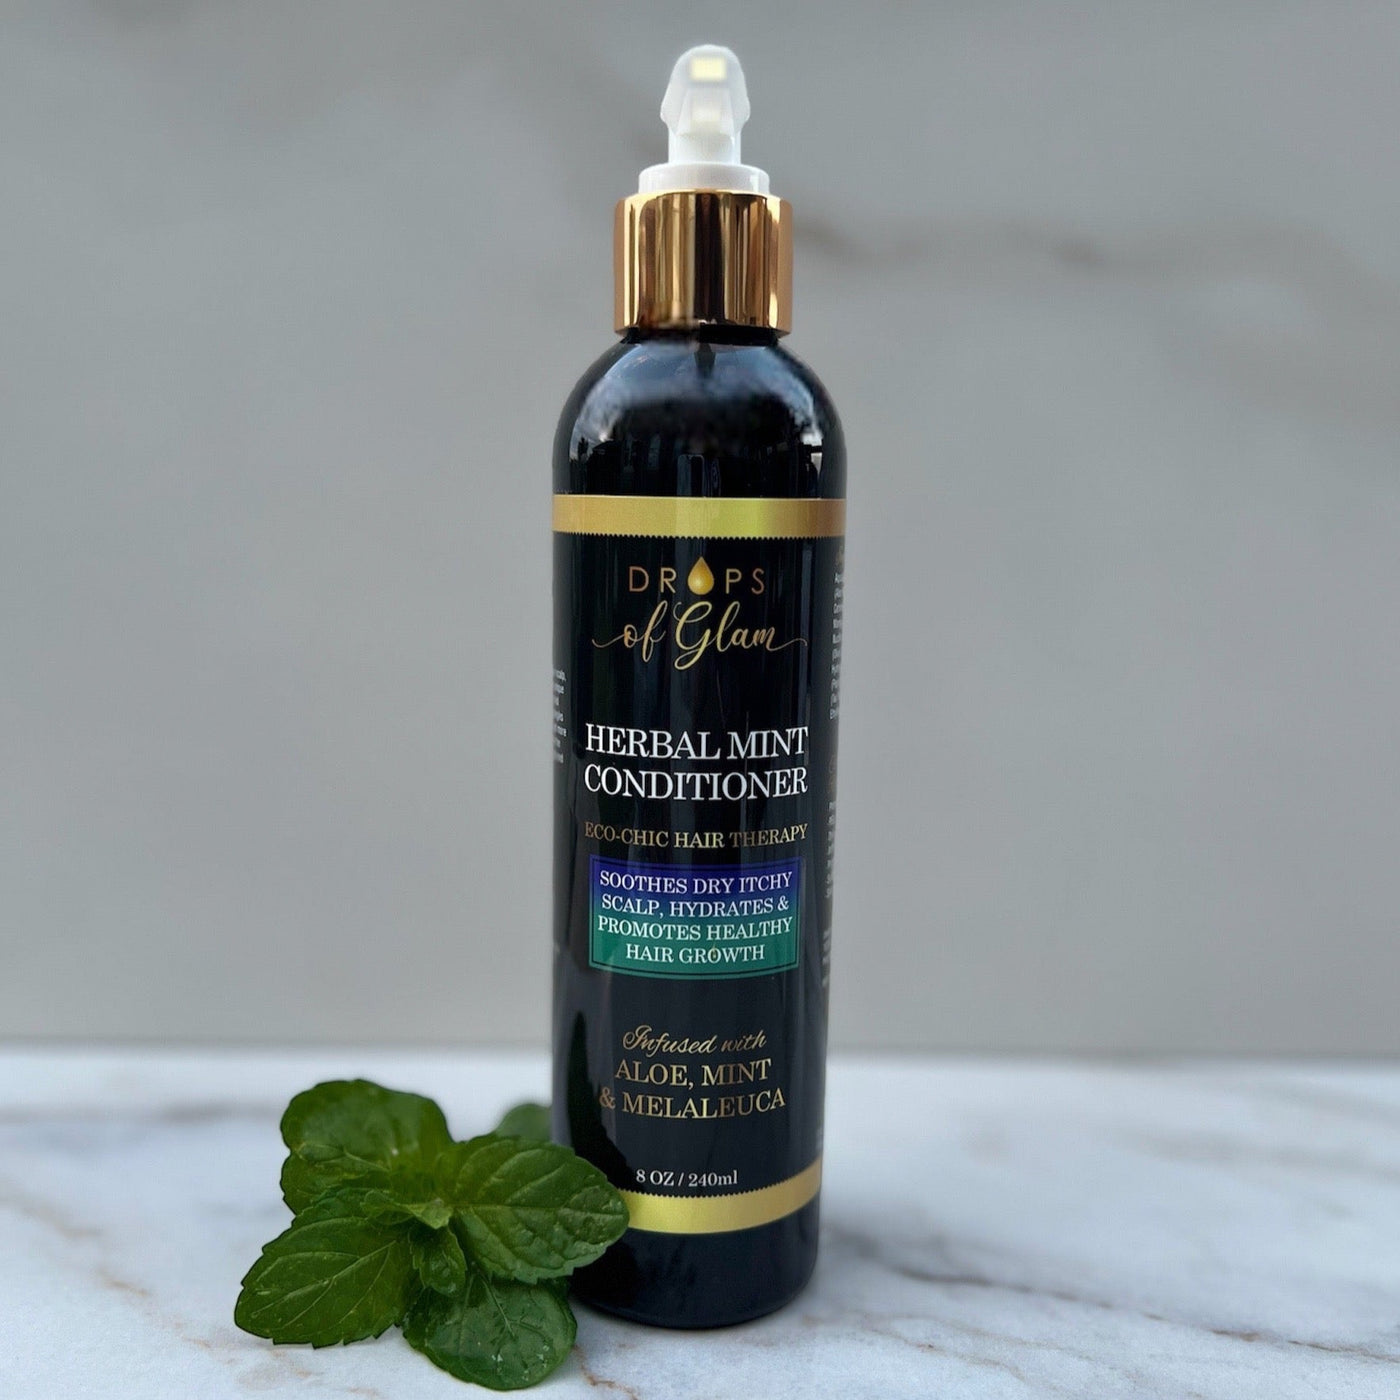 Herbal Mint Conditioner - Bundles and Drops of Glam